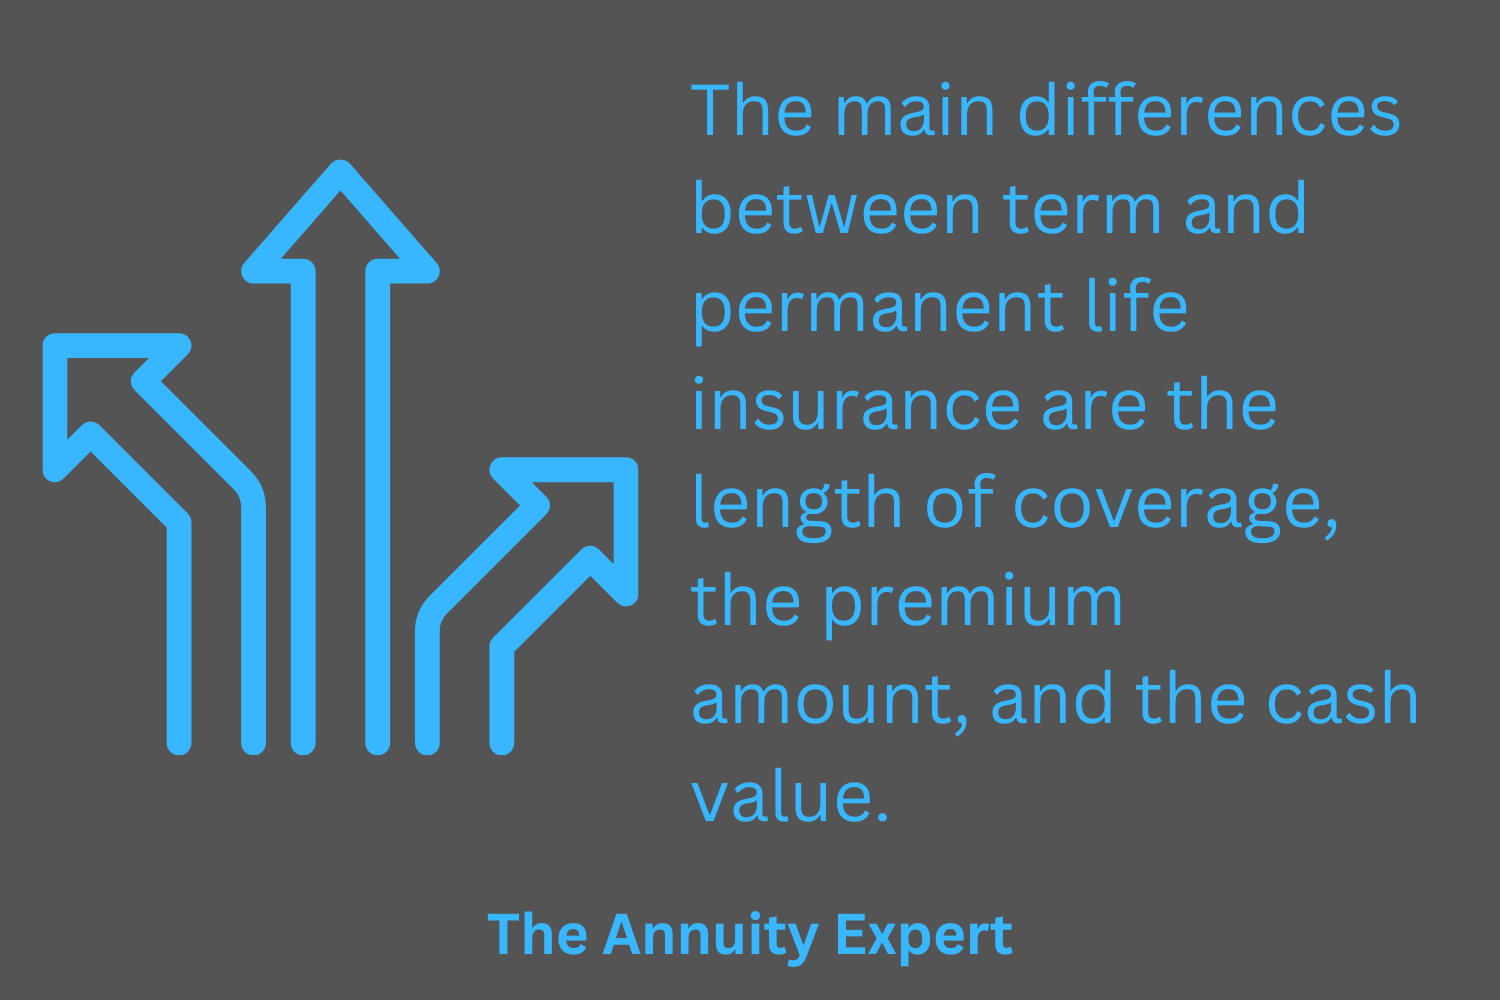 What Is The Difference Between Term Life And Permanent Life Insurance?